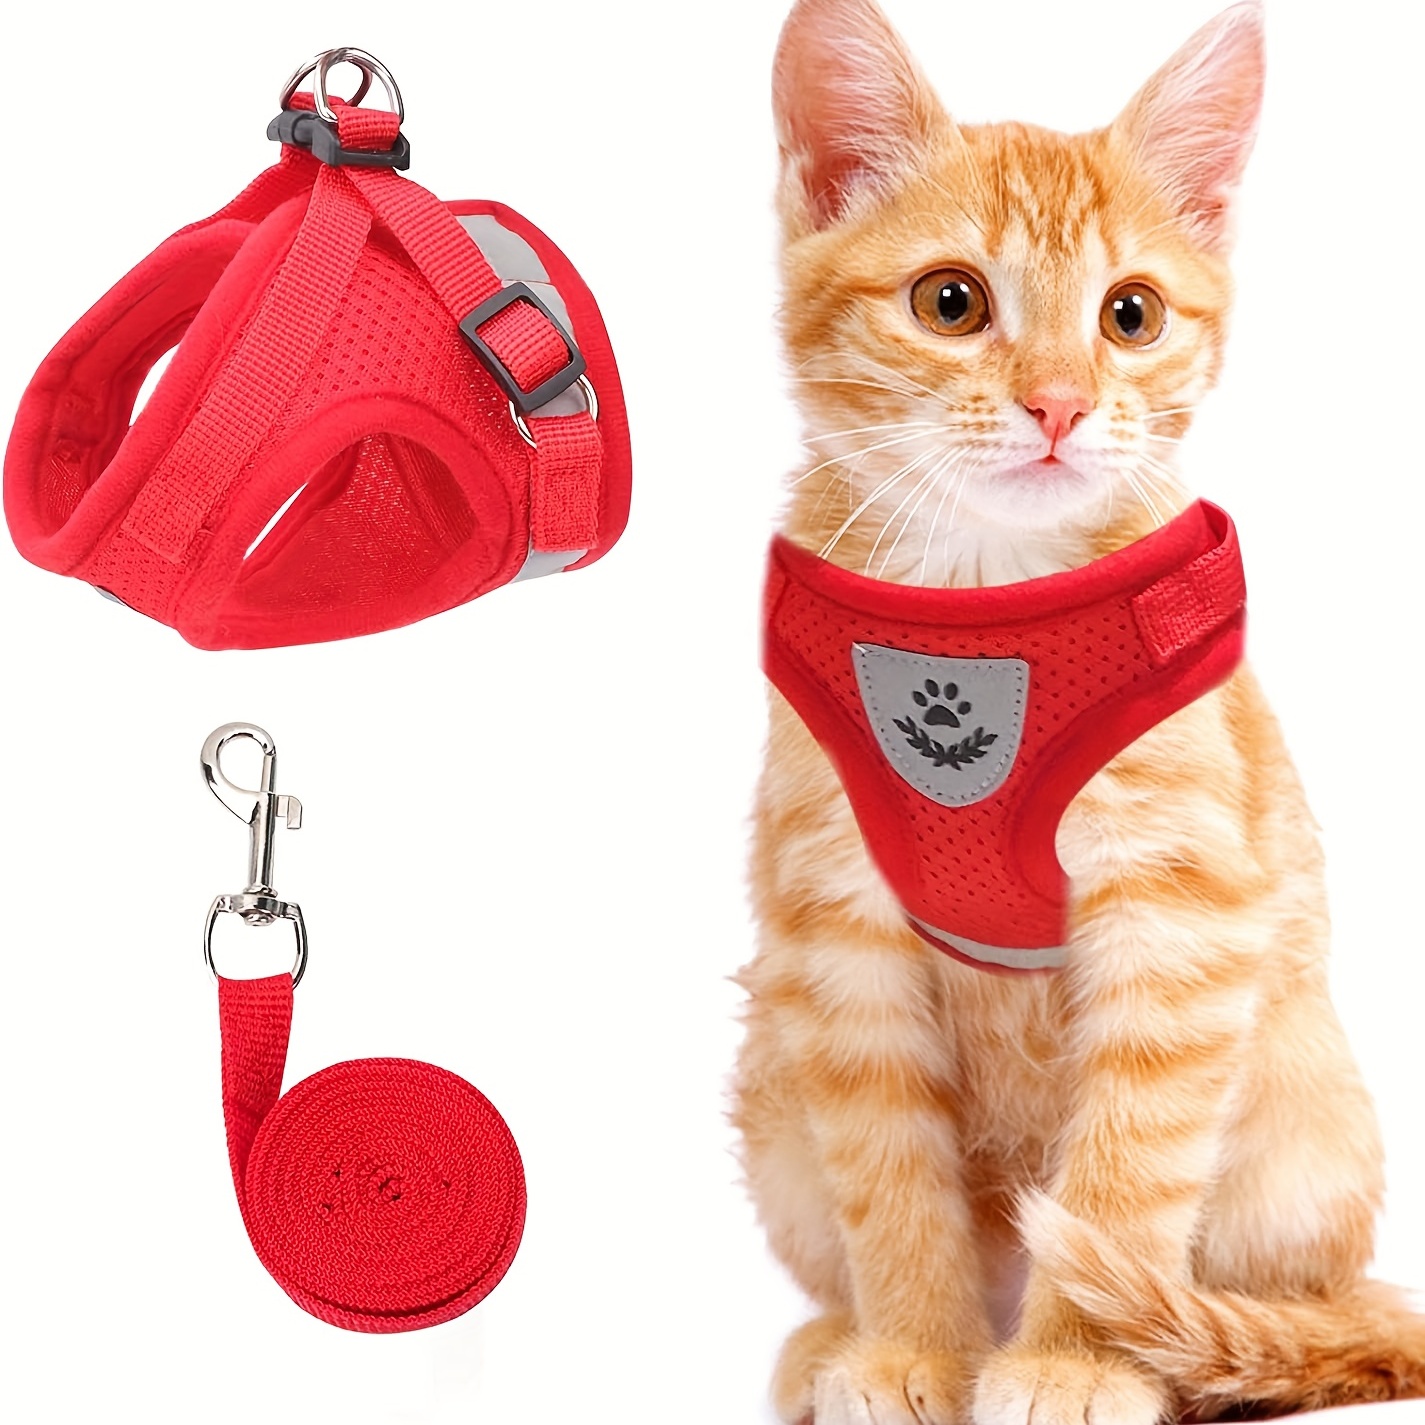 

Cat Harness And Leash Set For Walking, Escape Proof Soft Adjustable Cat Vest Harnesses With Reflective Strap For Pet Kitten Puppy Rabbit